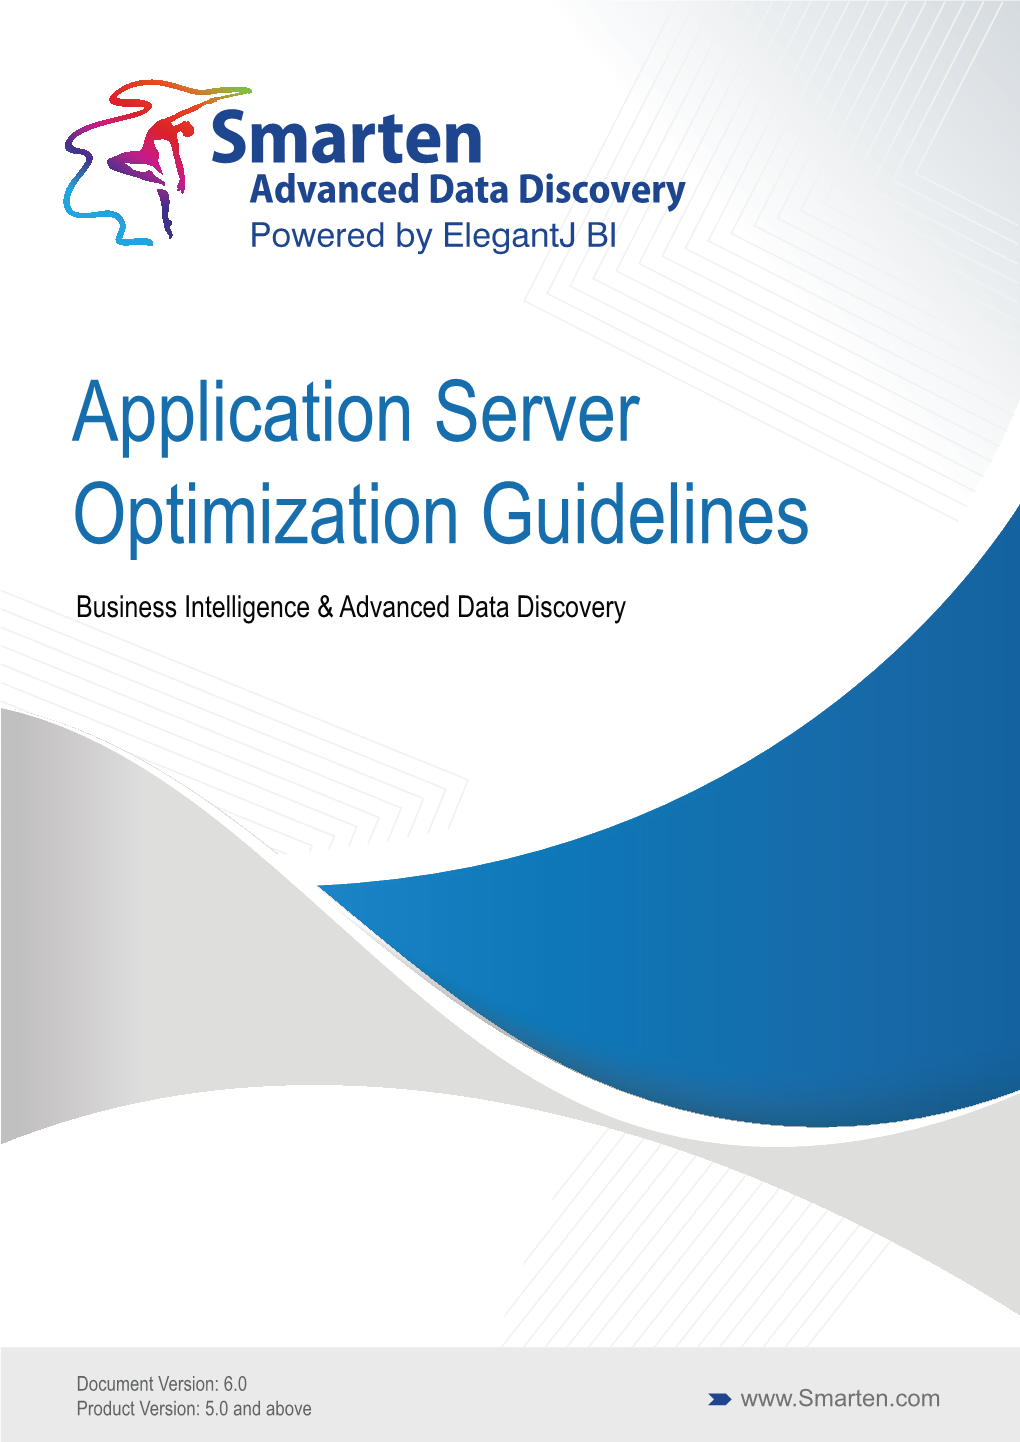 Application Server Optimization Guidelines Are Part of the Documentation Set for Smarten Advanced Data Discovery Version 5.0.0.Xxx